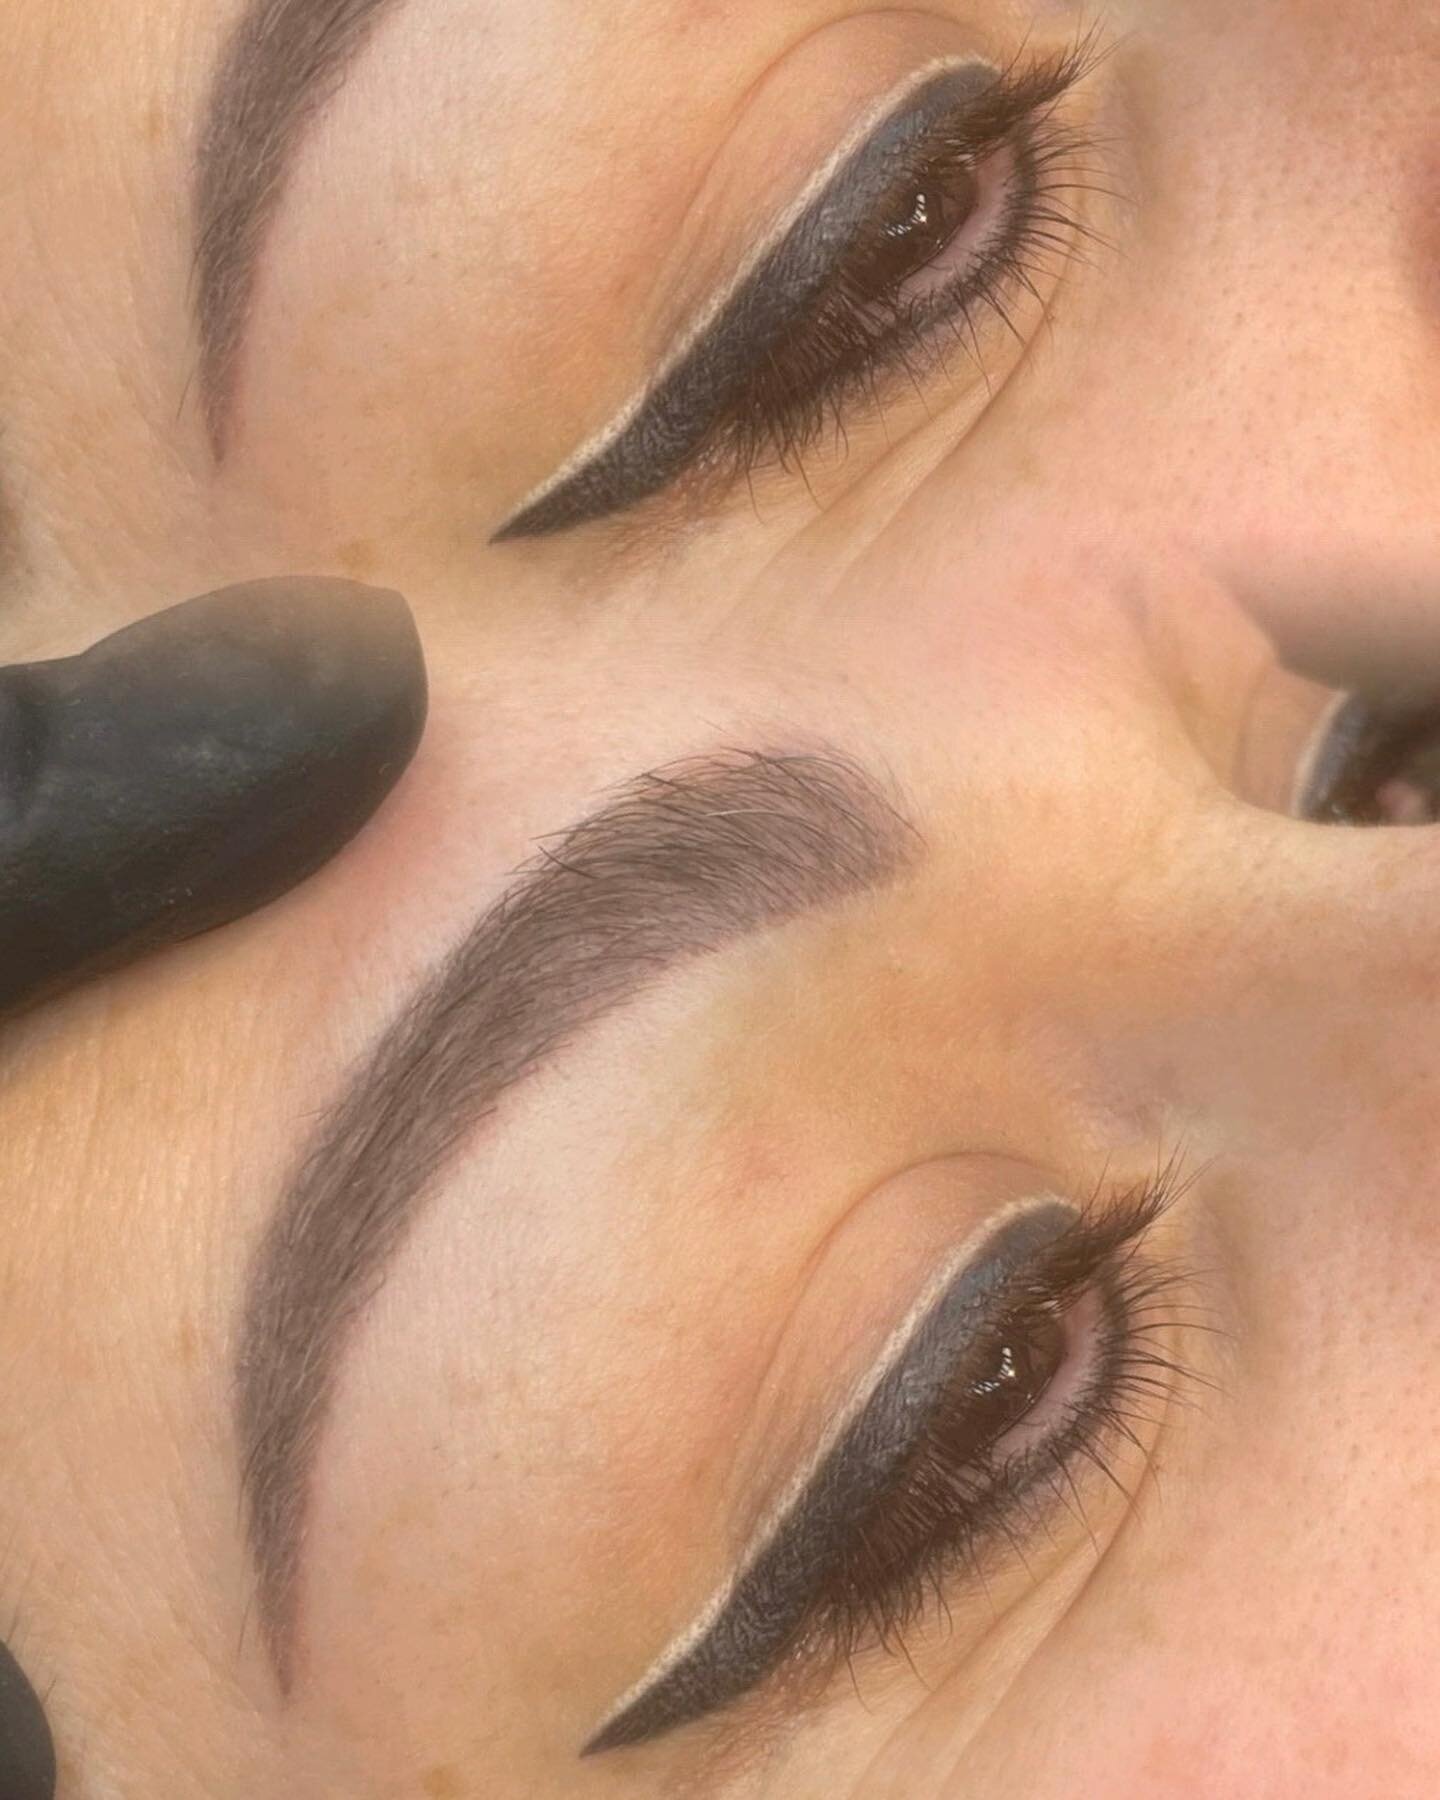 Quick minor touch up on this double liner 💙 Healed brows as well. 

#pmu #pmuartist #wakeupandmakeup #browdaddygold #browdaddygoldcollection #browdaddy #permablend #permablendpigments #fkirons #kwadron #kwadroncartridges #eyebrows #permanenteyebrows